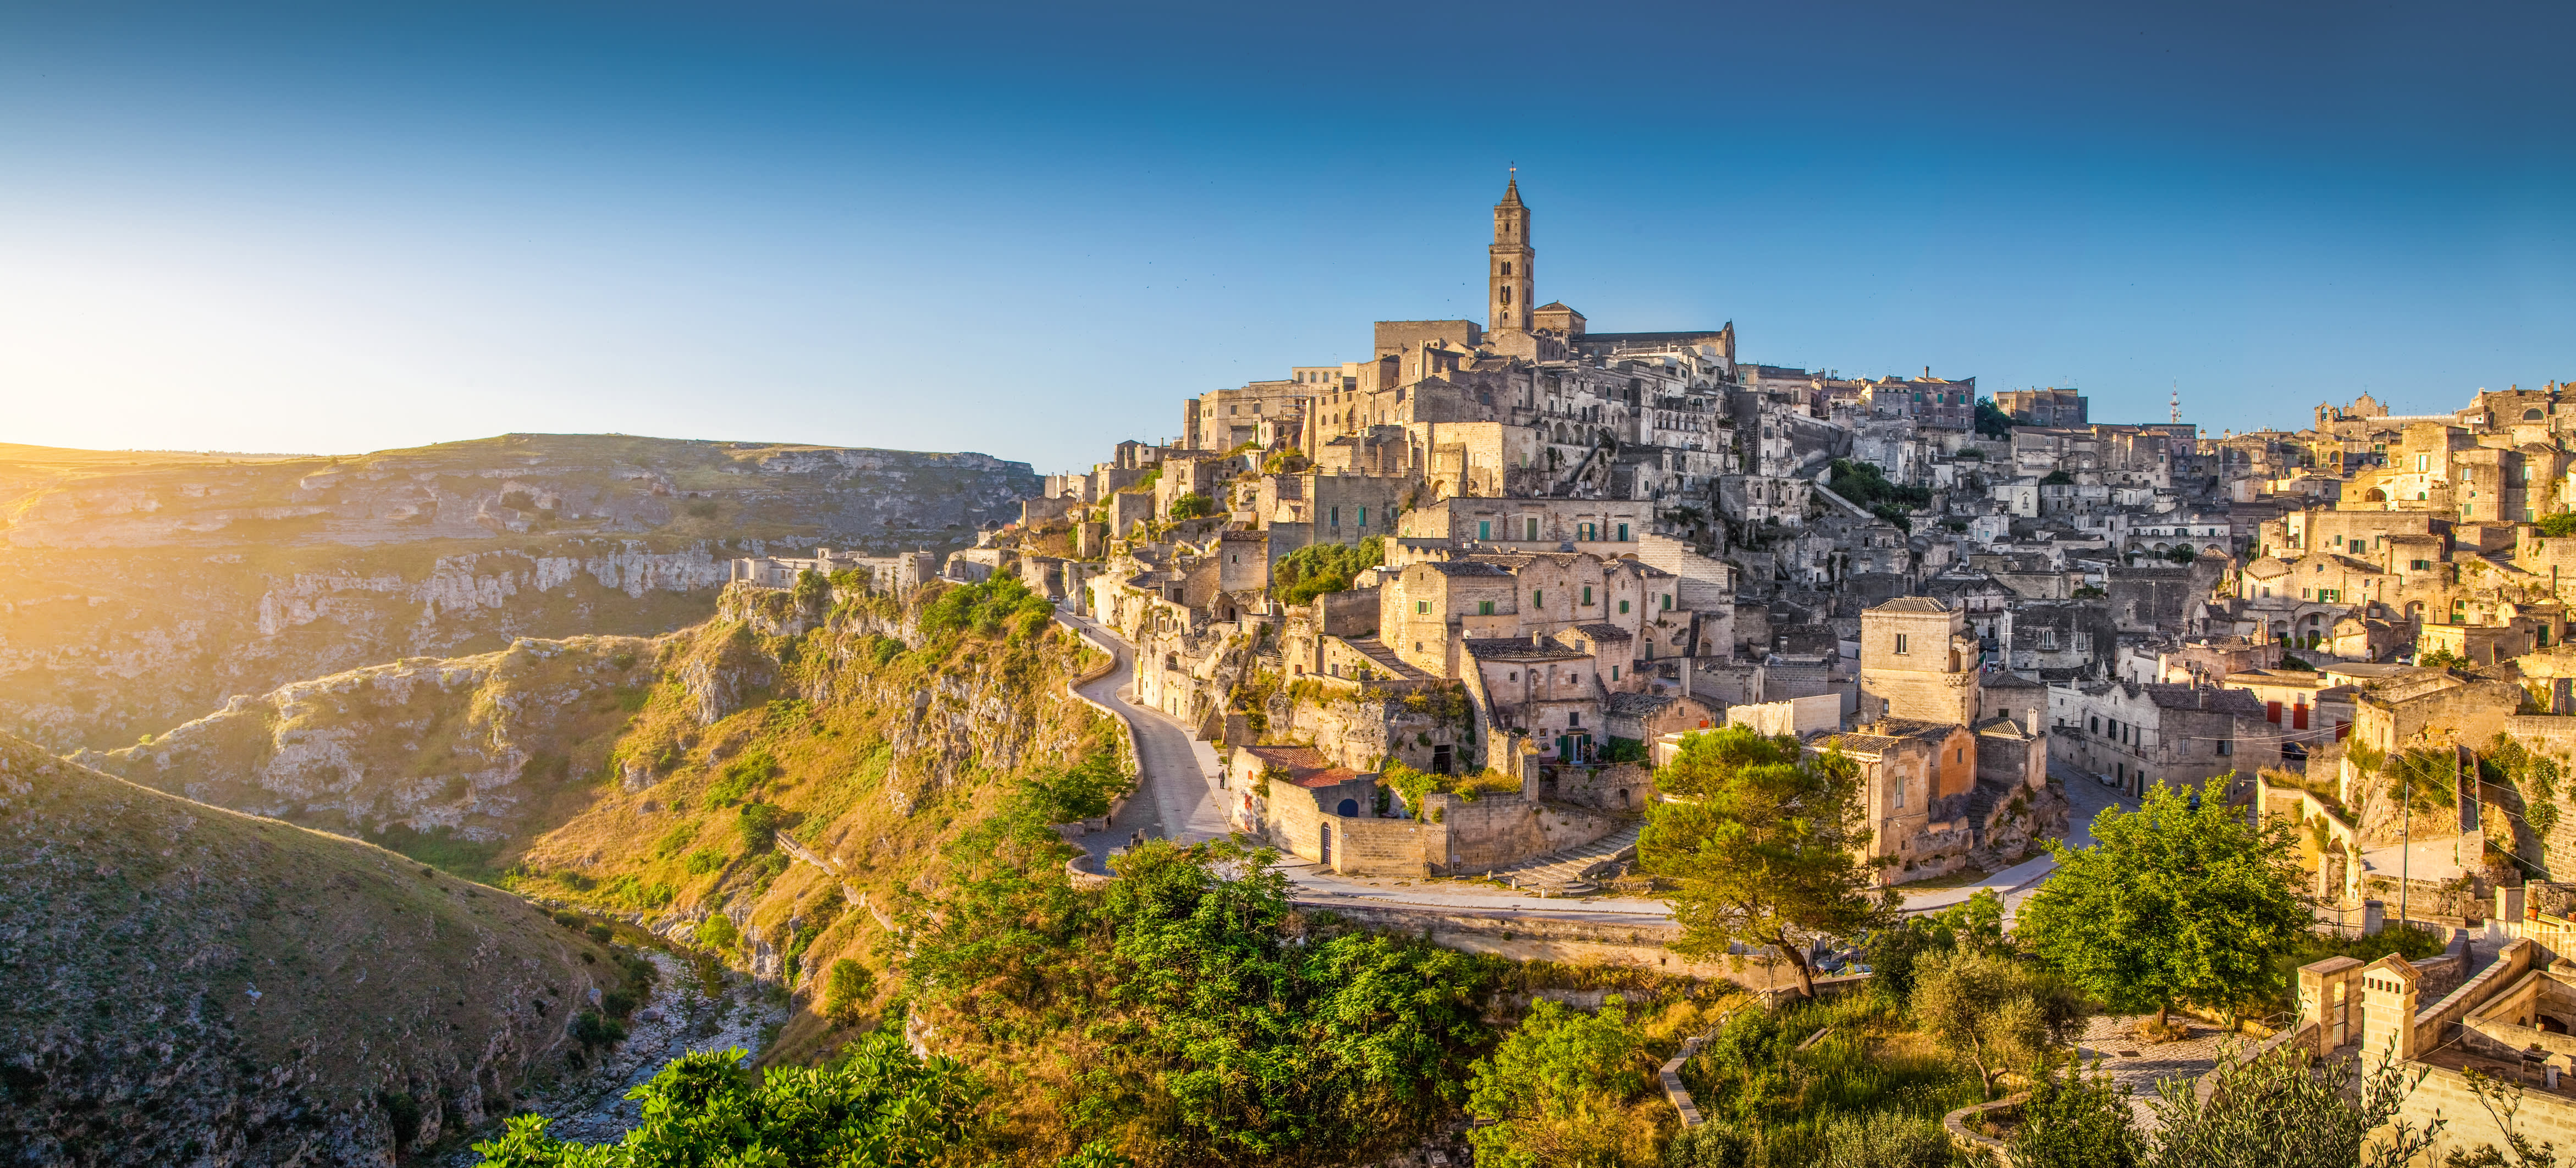 5 Great Hikes in Italy You May Not Know